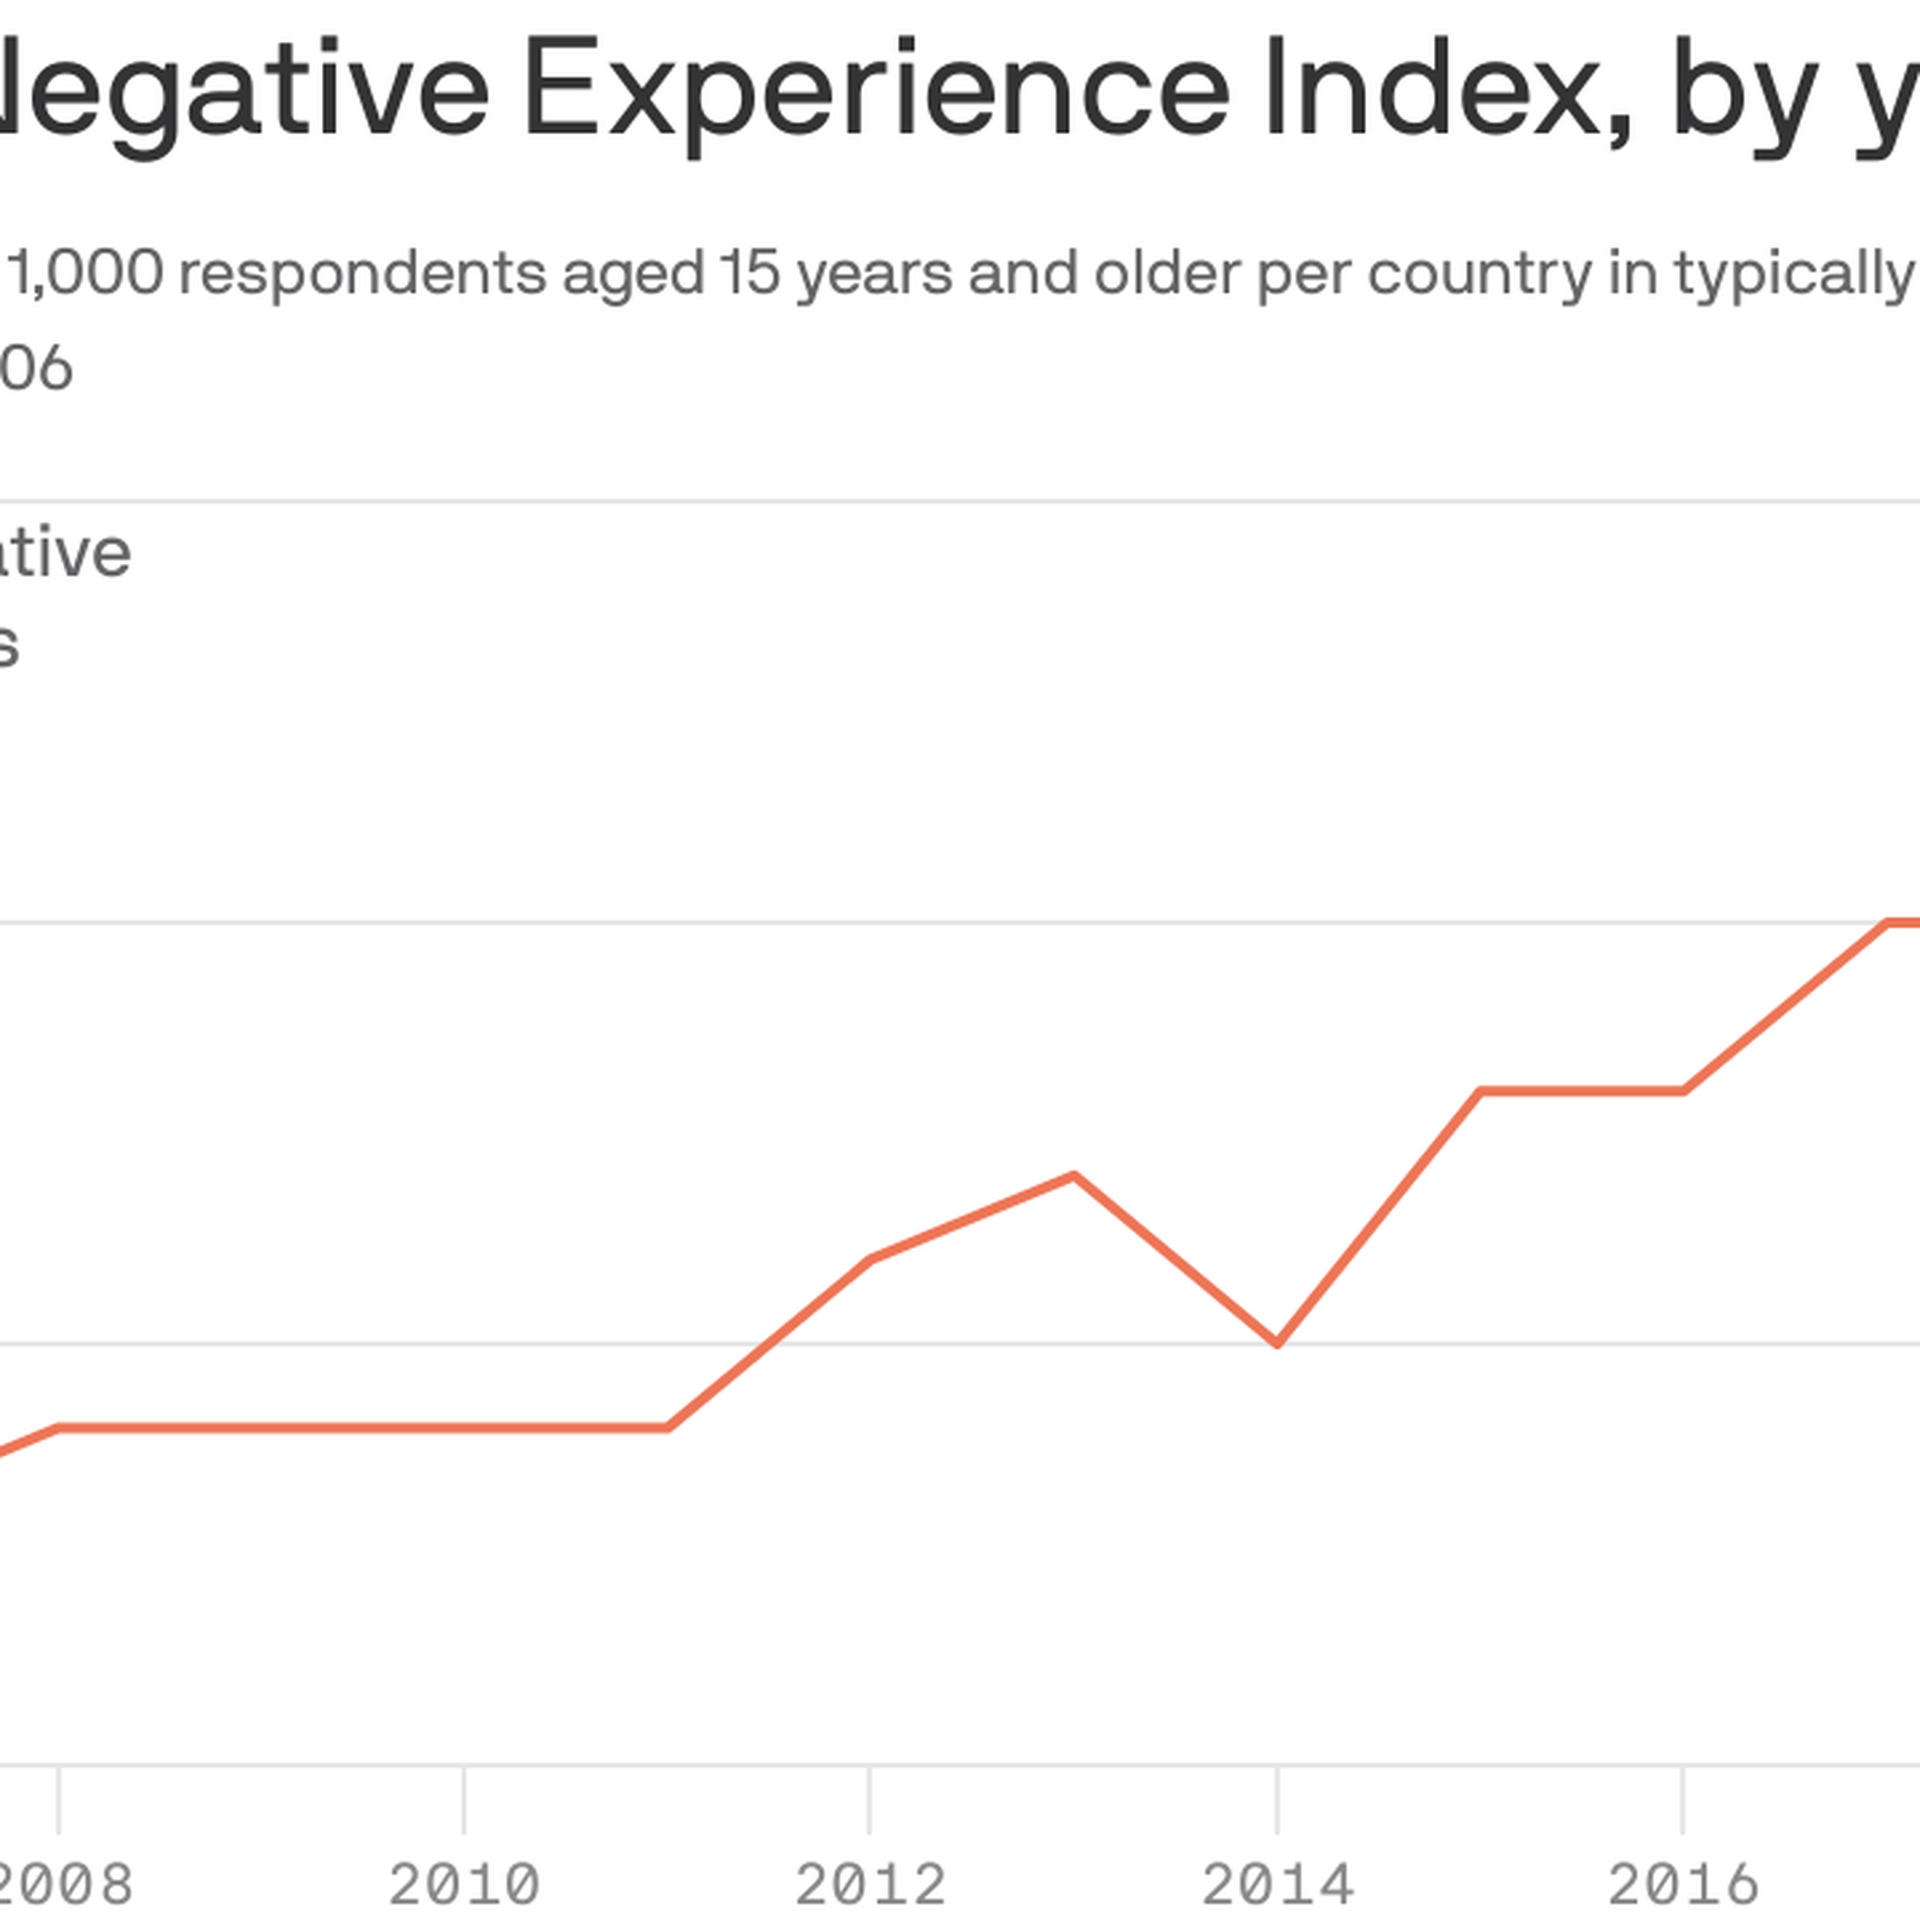 Global Negative Experience Index, by year